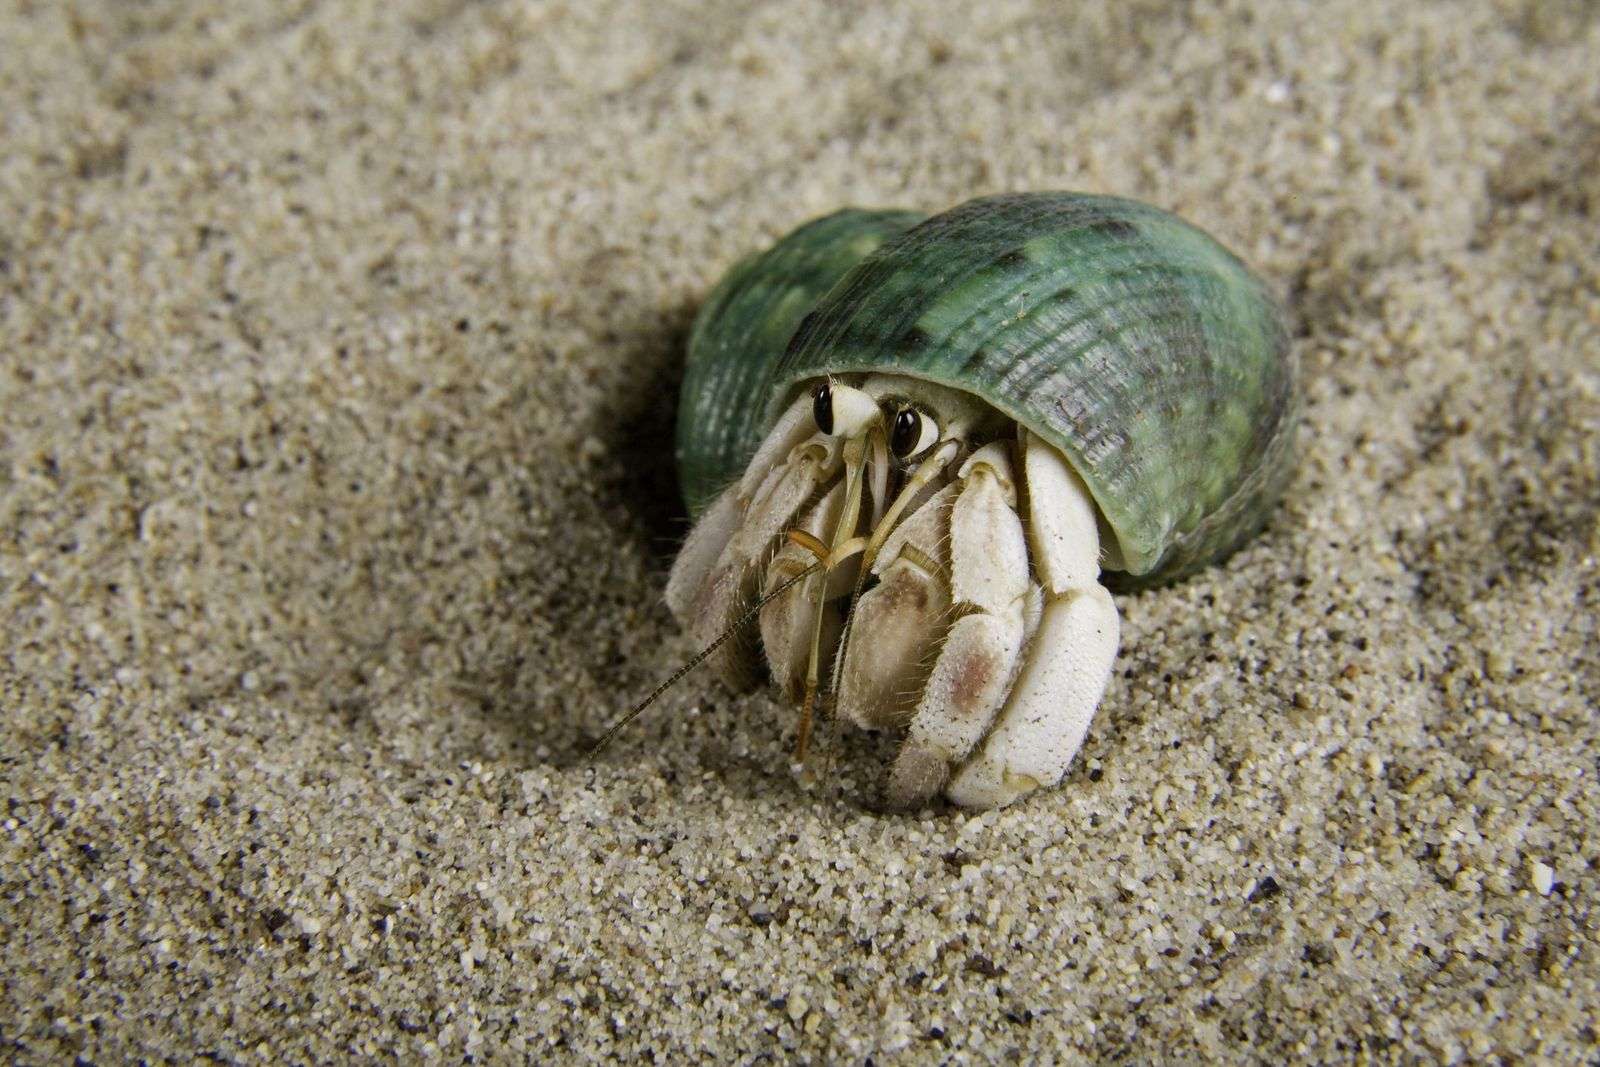 How To Get A Hermit Crab Out Of Its Shell